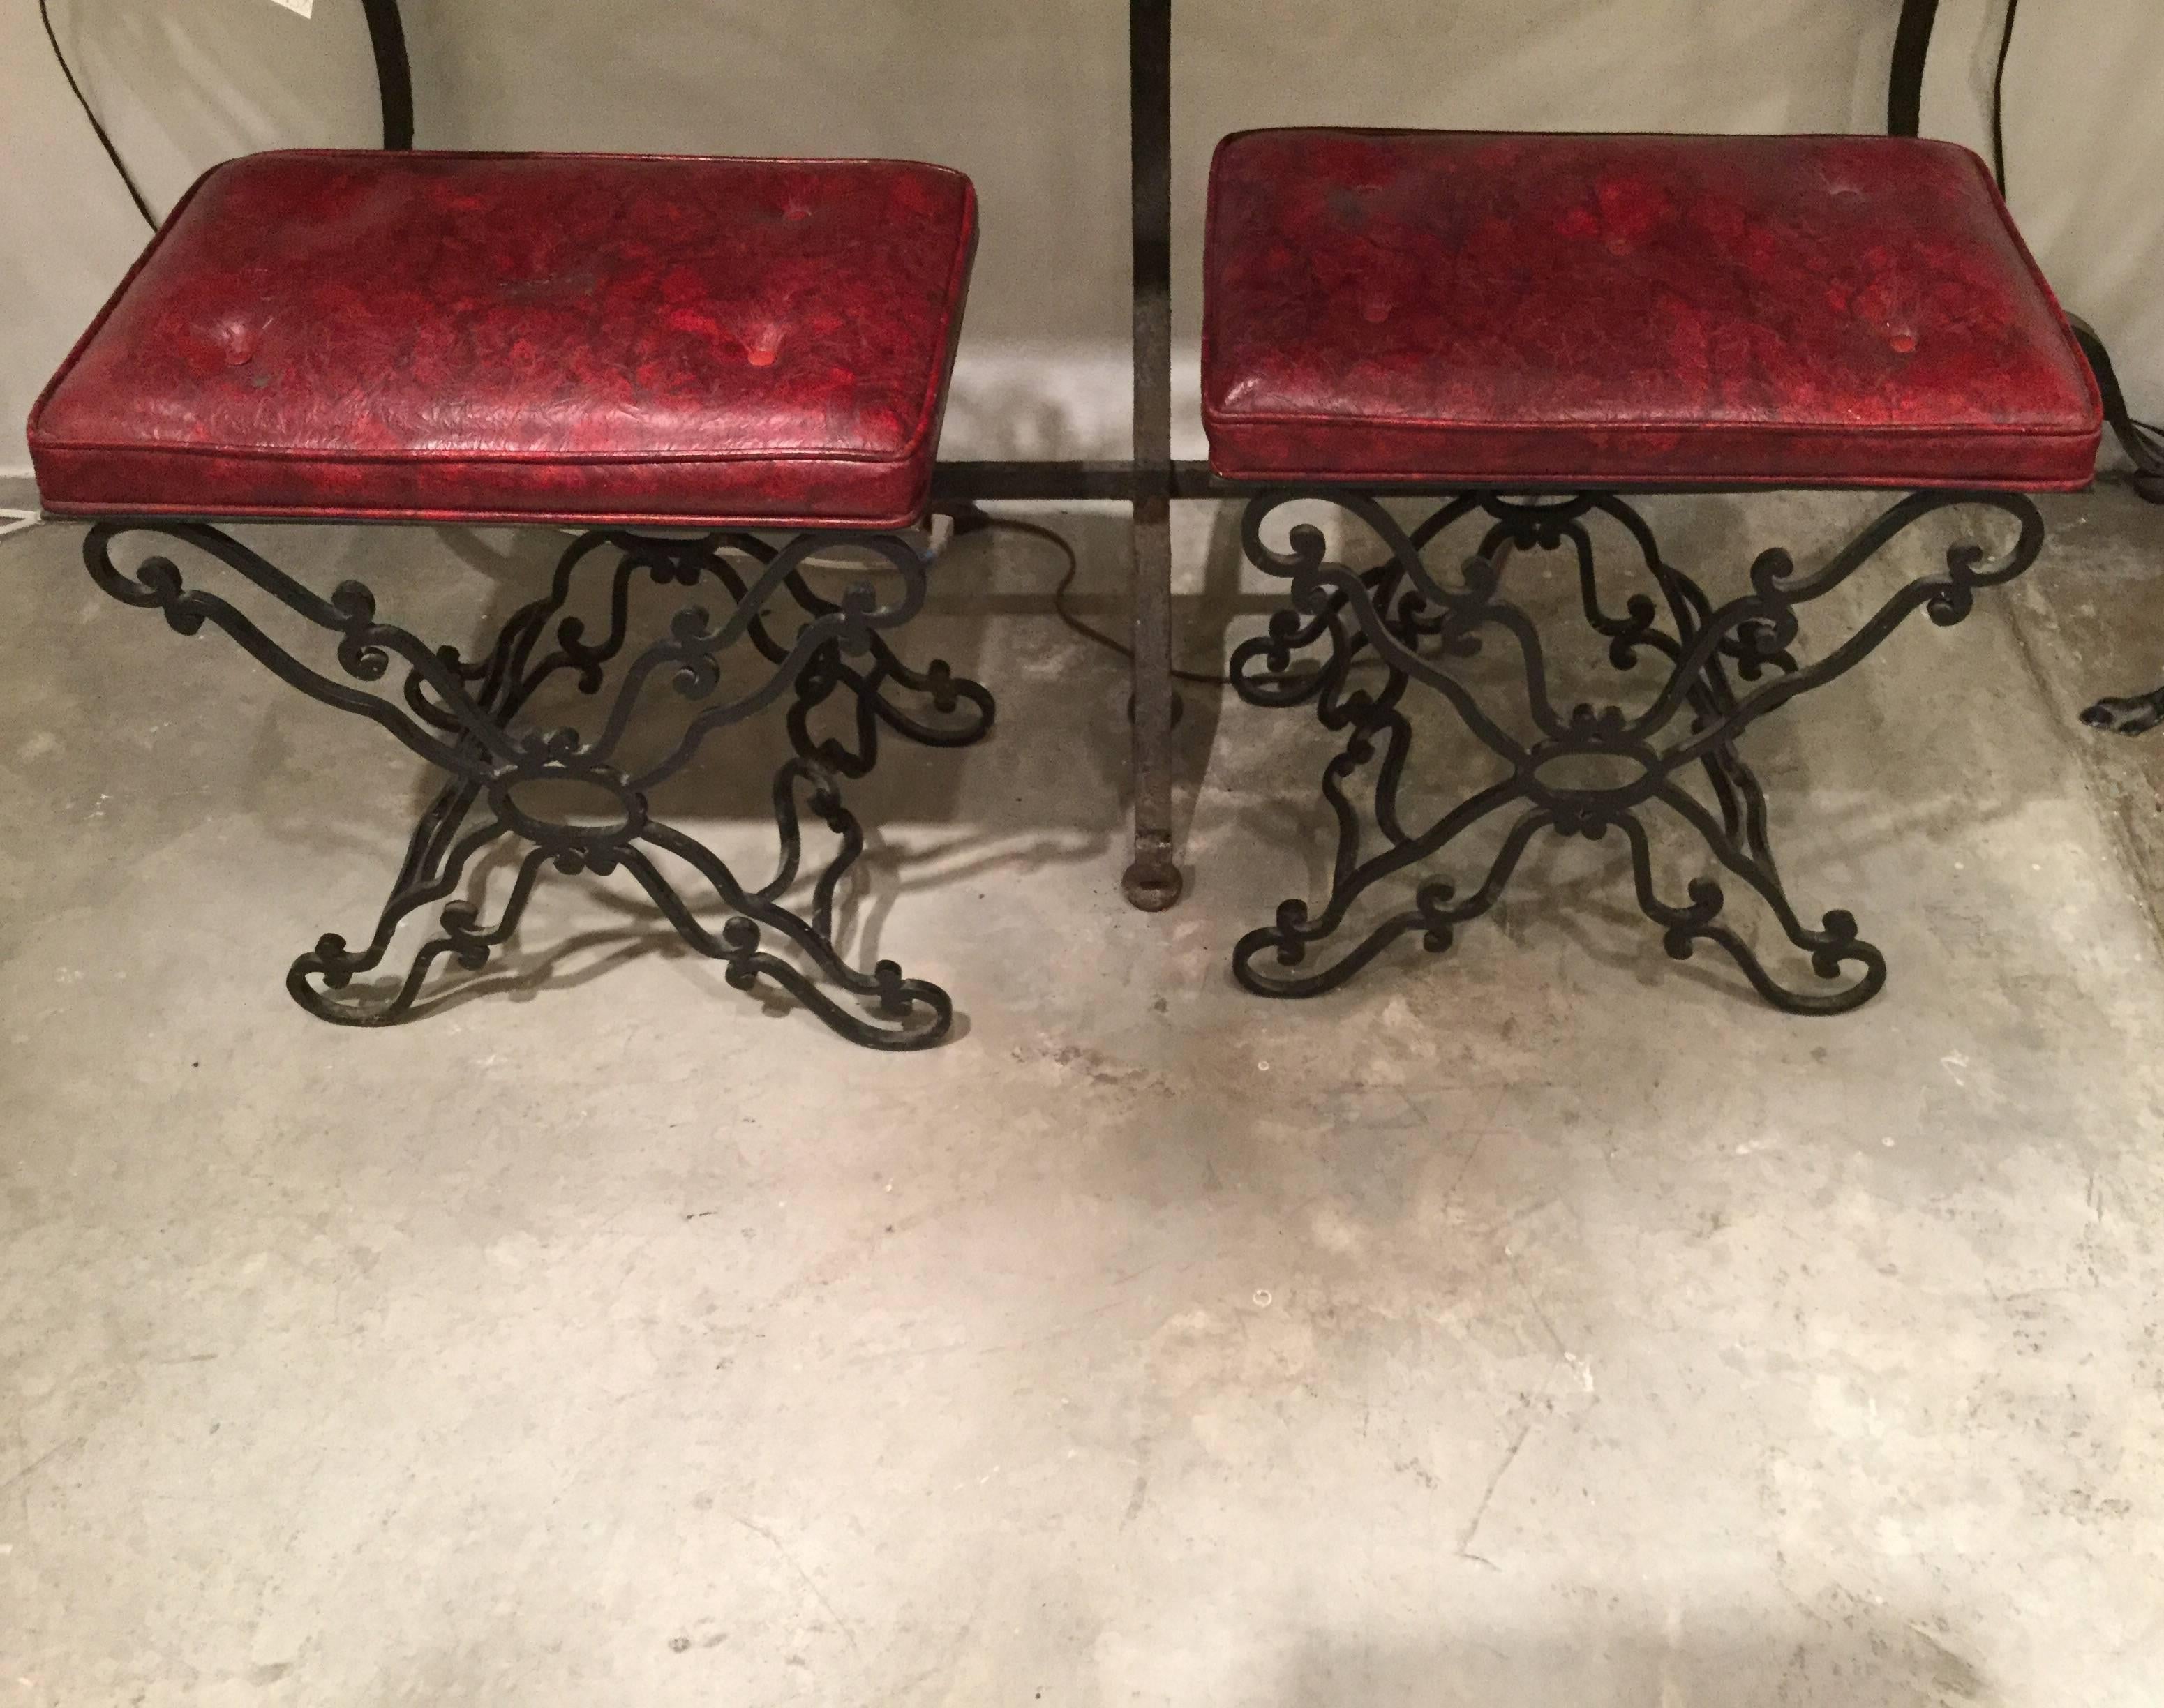 Matching pair of continental hand-forged wrought iron ottomans or stools with beautiful detailing, circa 1930-1940. Currently upholstered in vinyl, easy to re upholster.
Would work well in a variety of interiors.
      